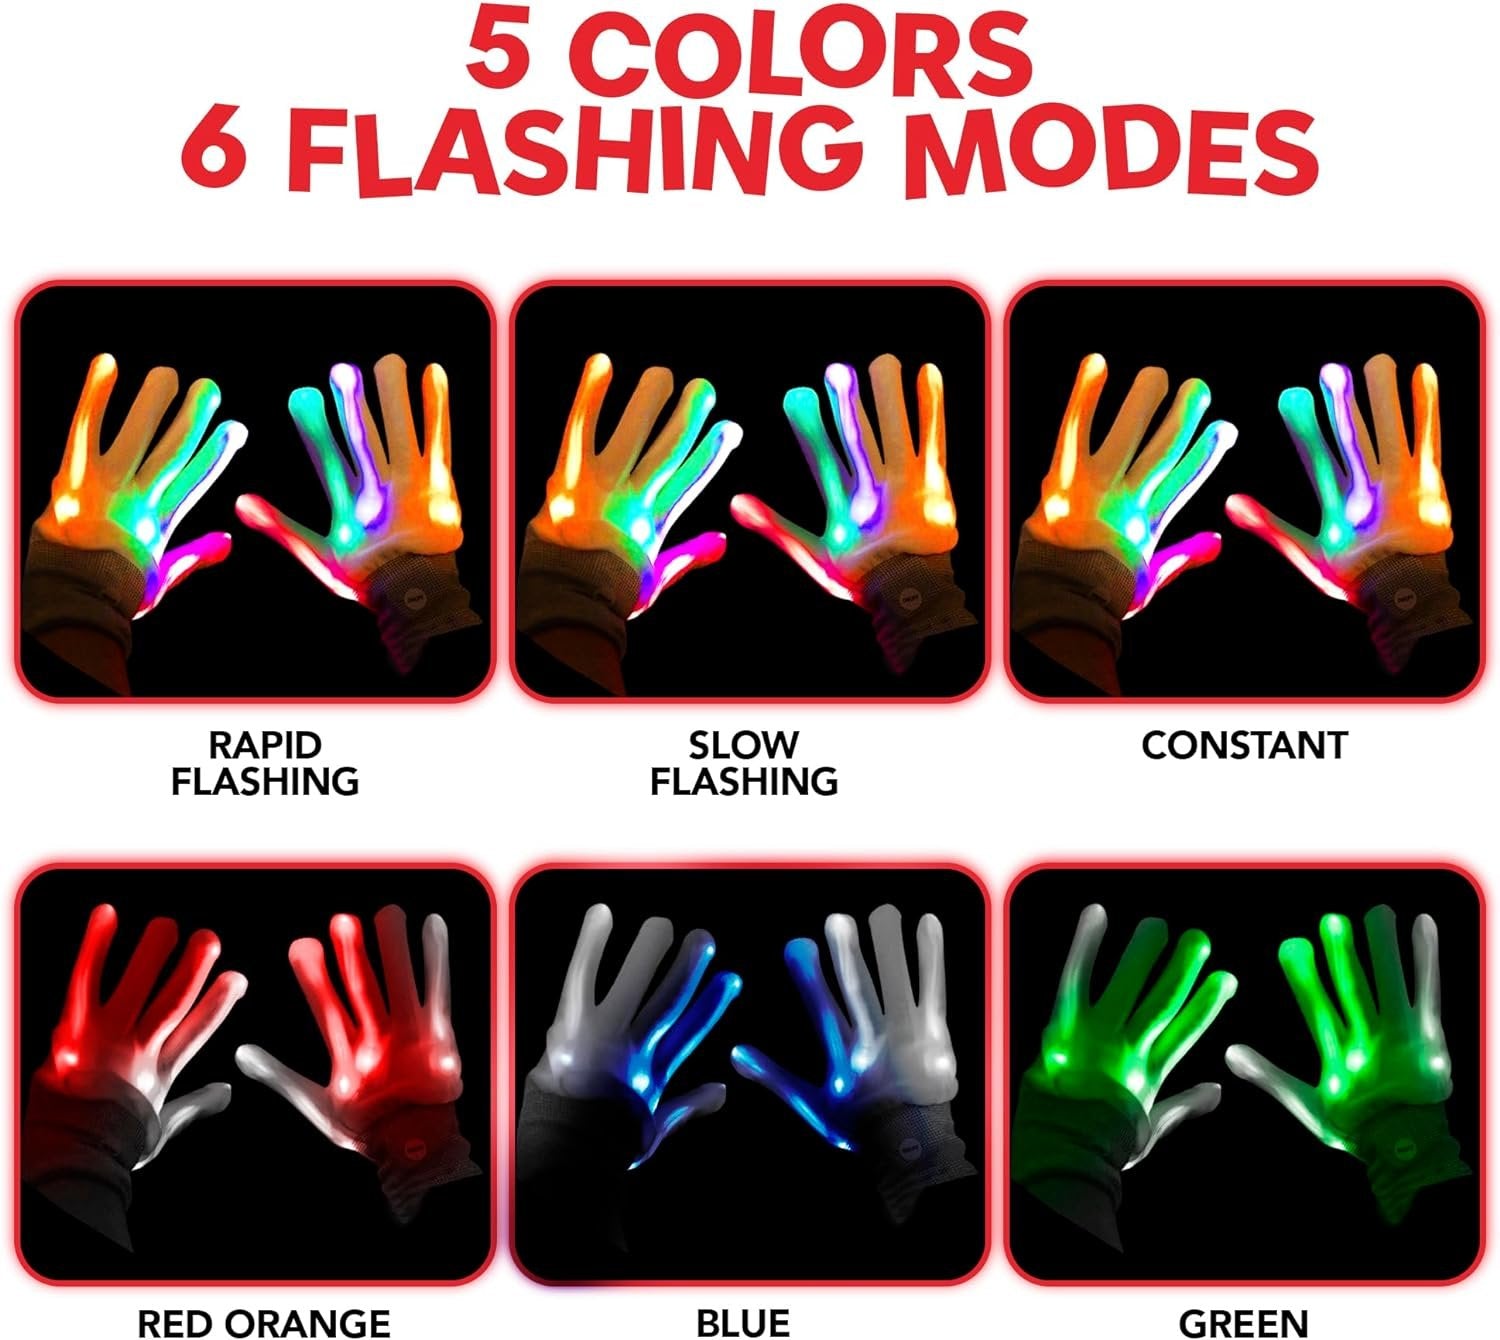 Led Light Up Gloves for Kids - 1 Pair - Medium Sized Glow in the Dark Gloves with 6 Cool Flashing Modes - Kids Light Up Gloves for Halloween Costumes - Rainbow Party Favors